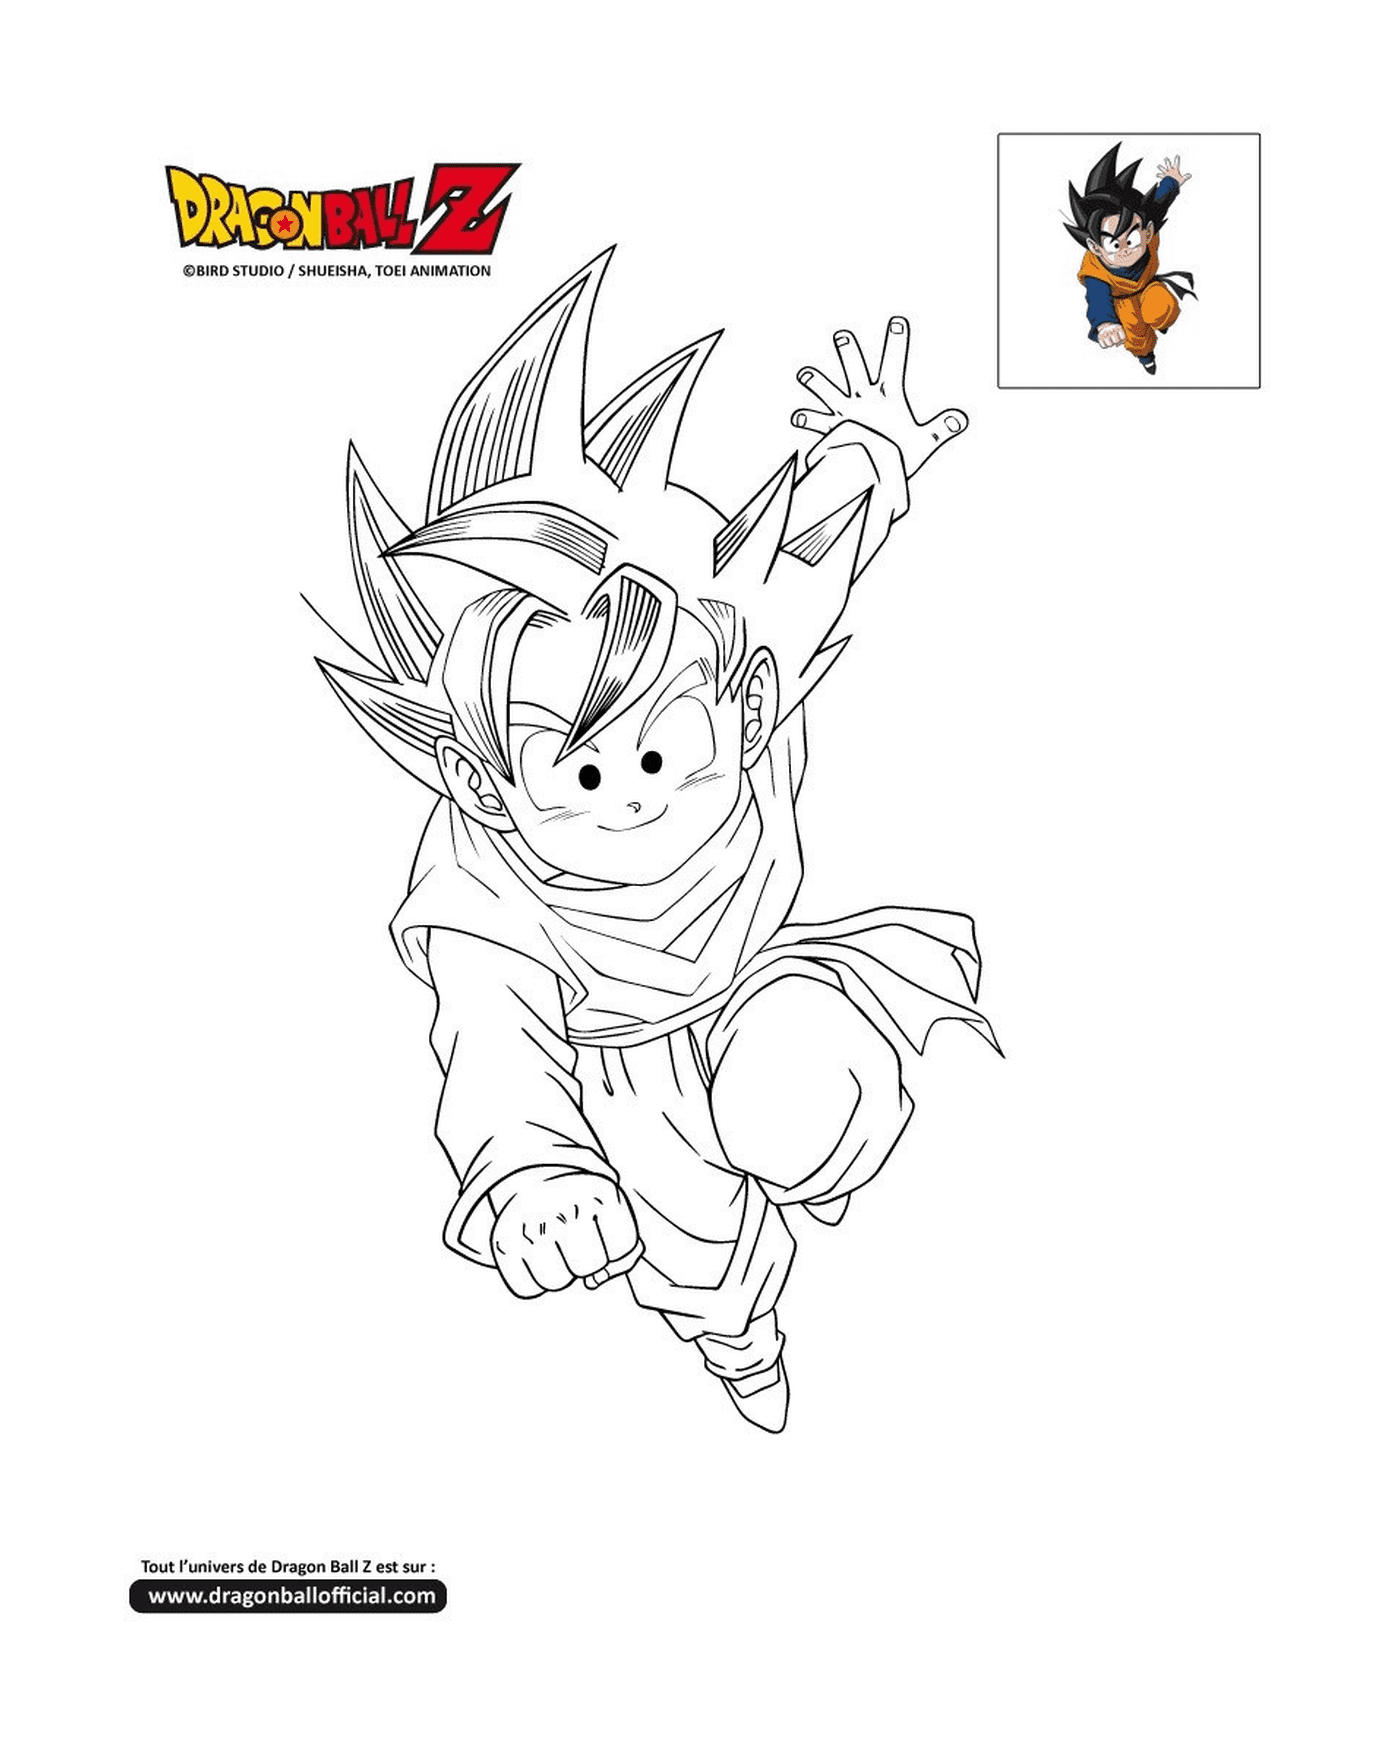  Goten, a young Goku jumping in the air in Dragon Ball Z 